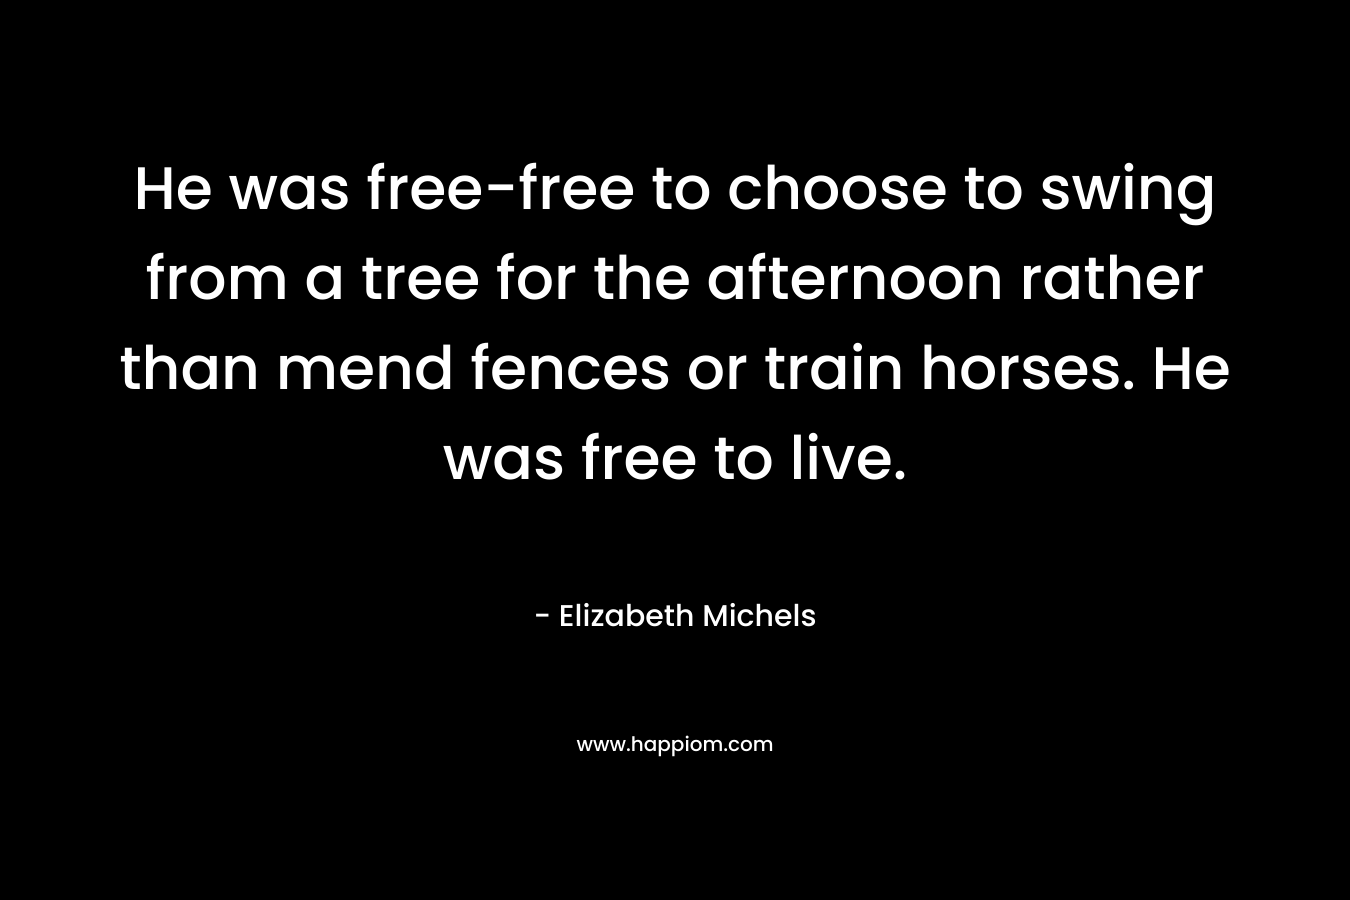 He was free-free to choose to swing from a tree for the afternoon rather than mend fences or train horses. He was free to live.